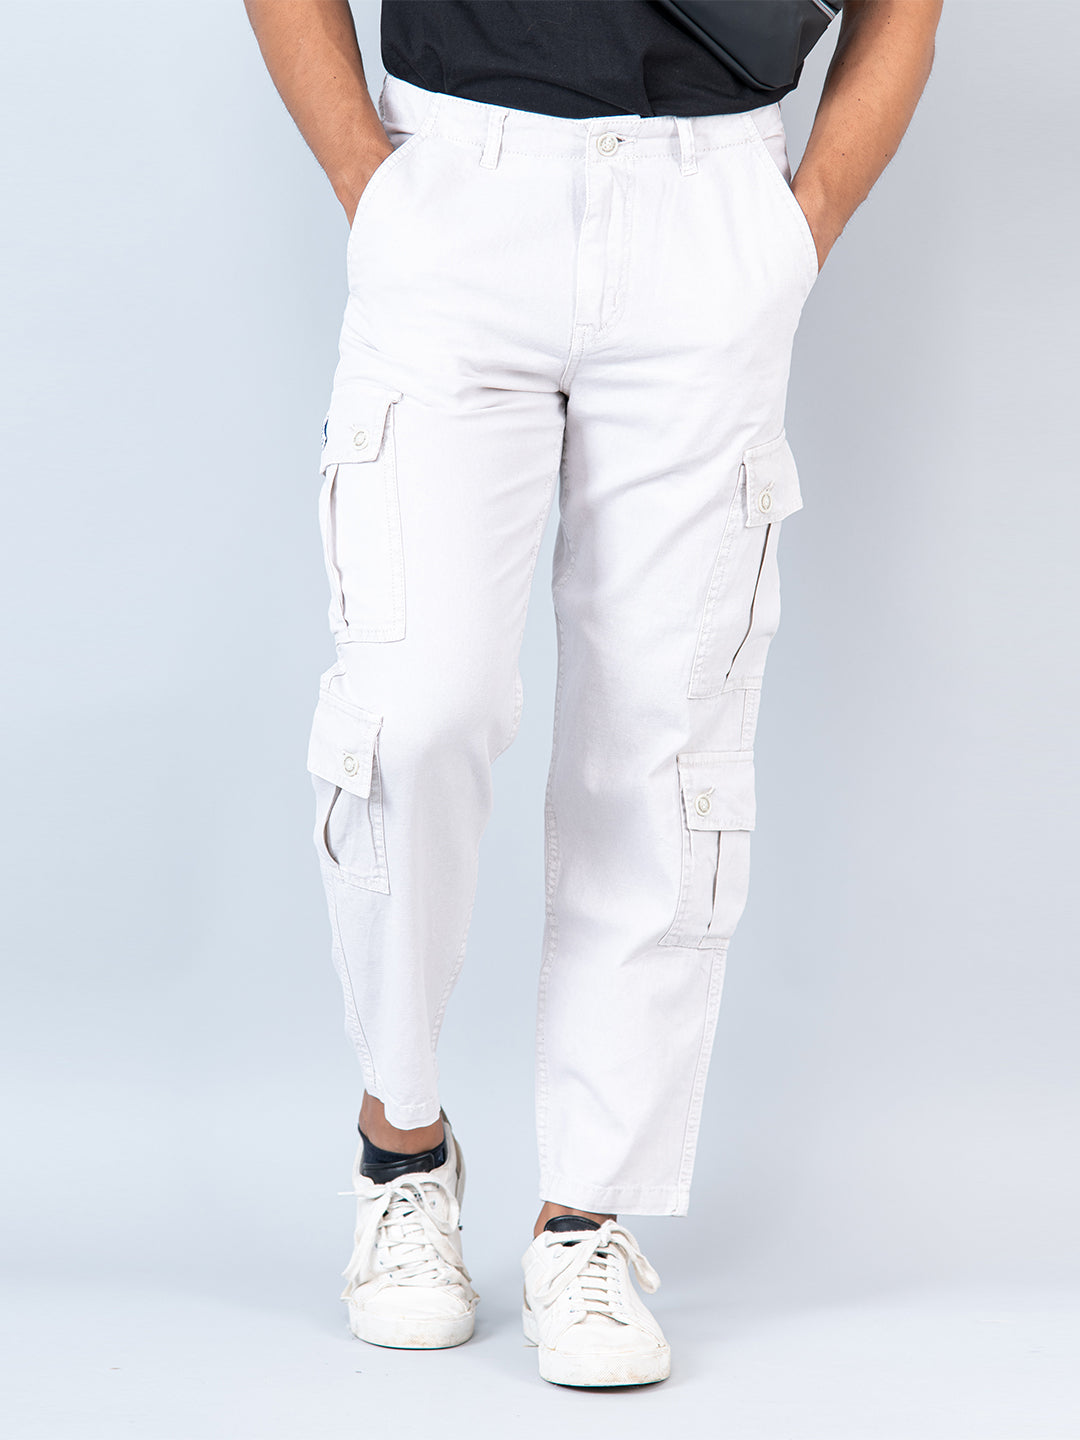 Relaxed Fit Cotton drawstring trousers - Cream - Men | H&M IN